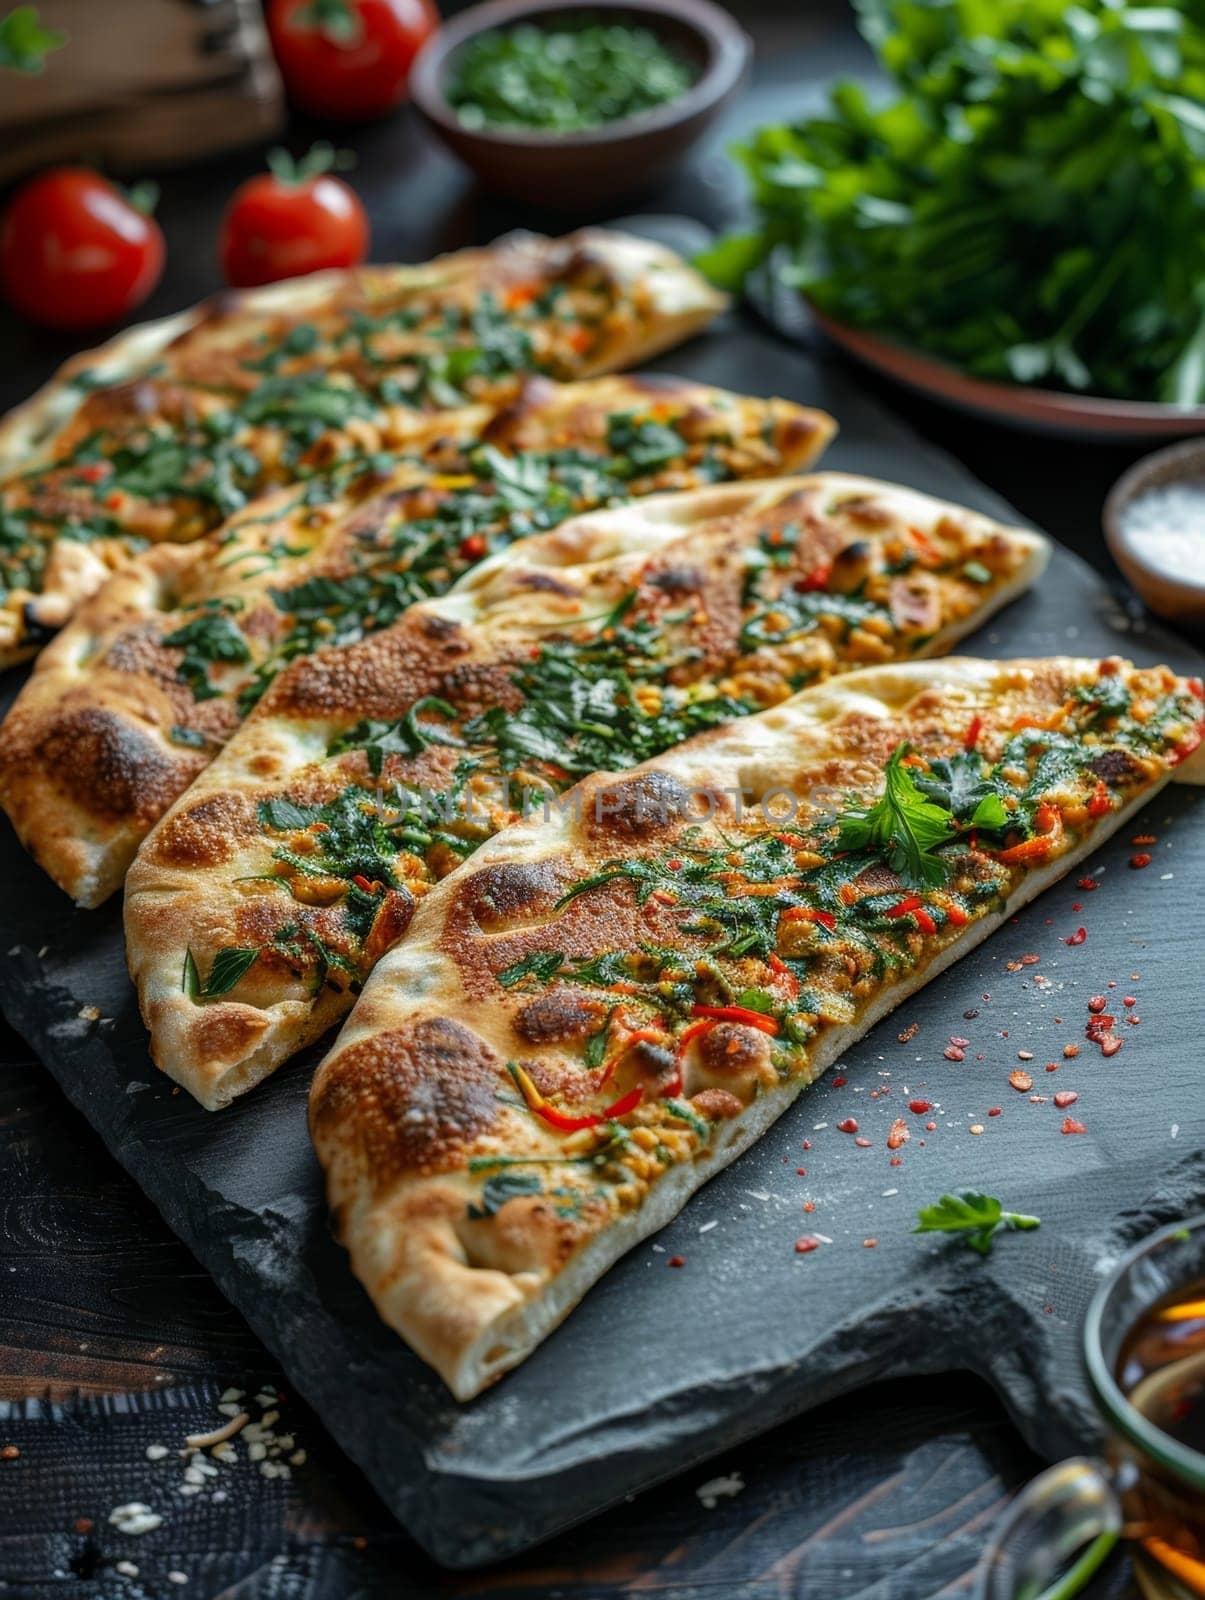 Traditional Azerbaijani qutab, stuffed flatbreads with either greens or minced meat, served on a slate serving board. Hand-crafted and flavorful dish represents the rich culinary heritage of Caucasus. by sfinks